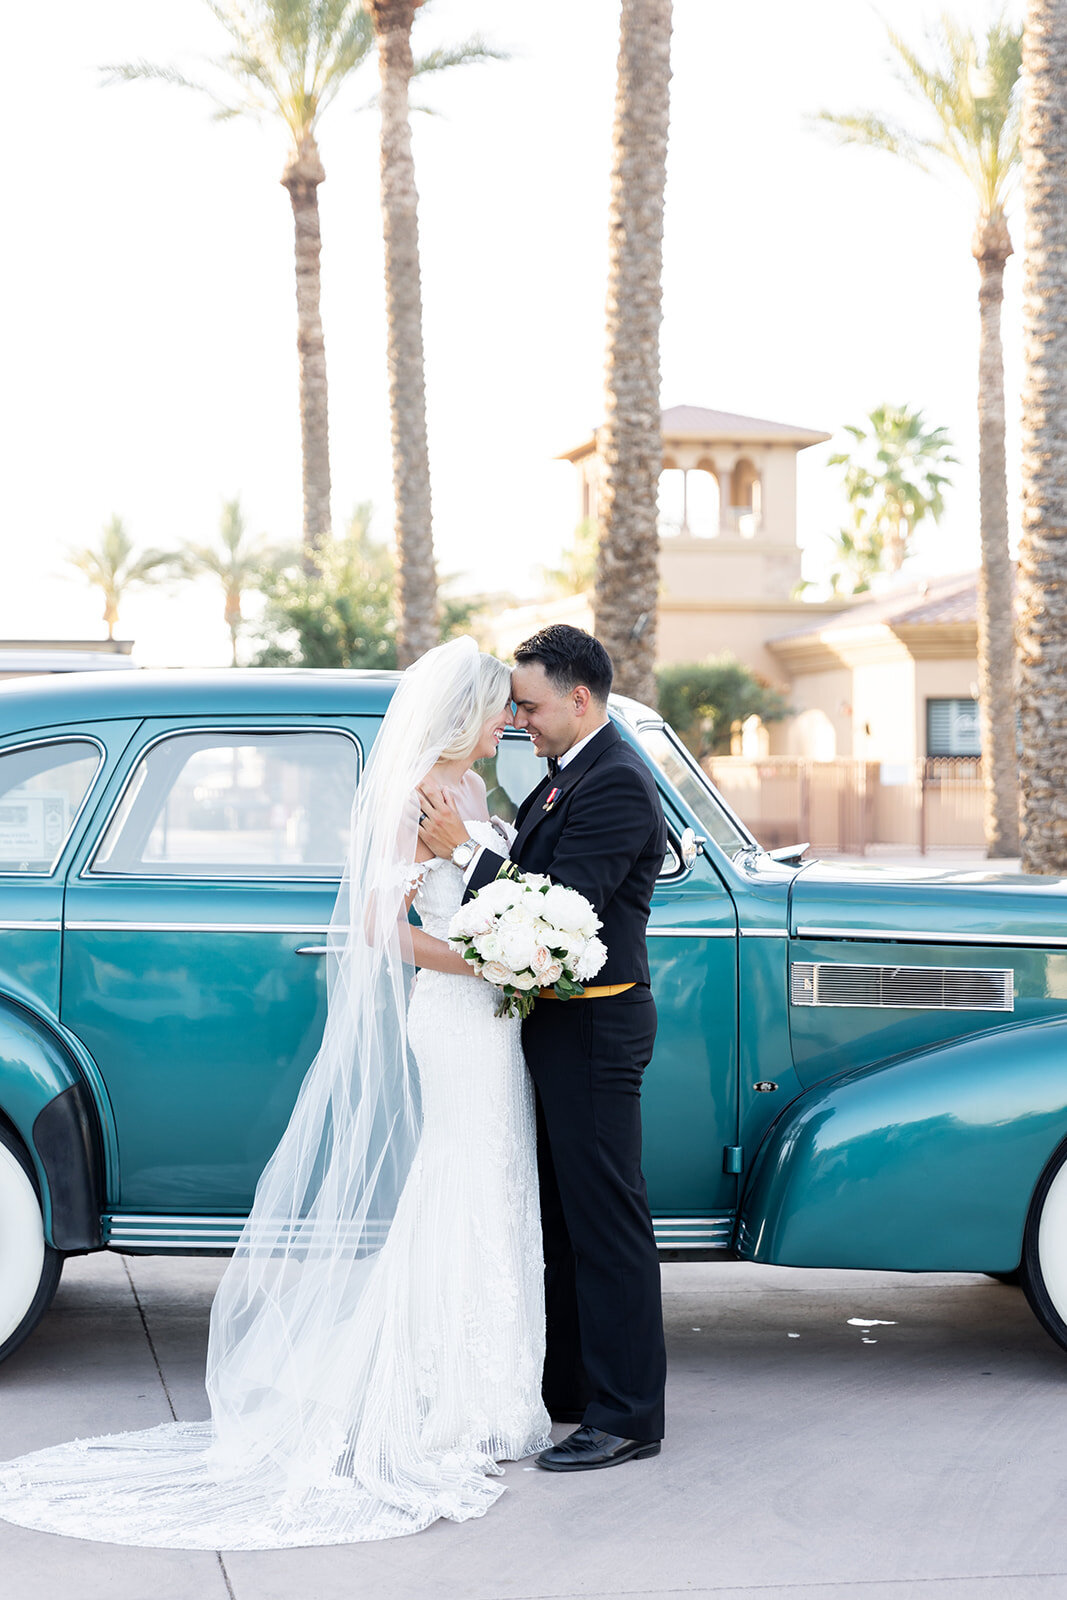 Karlie Colleen Photography - Holly & Ronnie Wedding - Seville Country Club - Gilbert Arizona-726